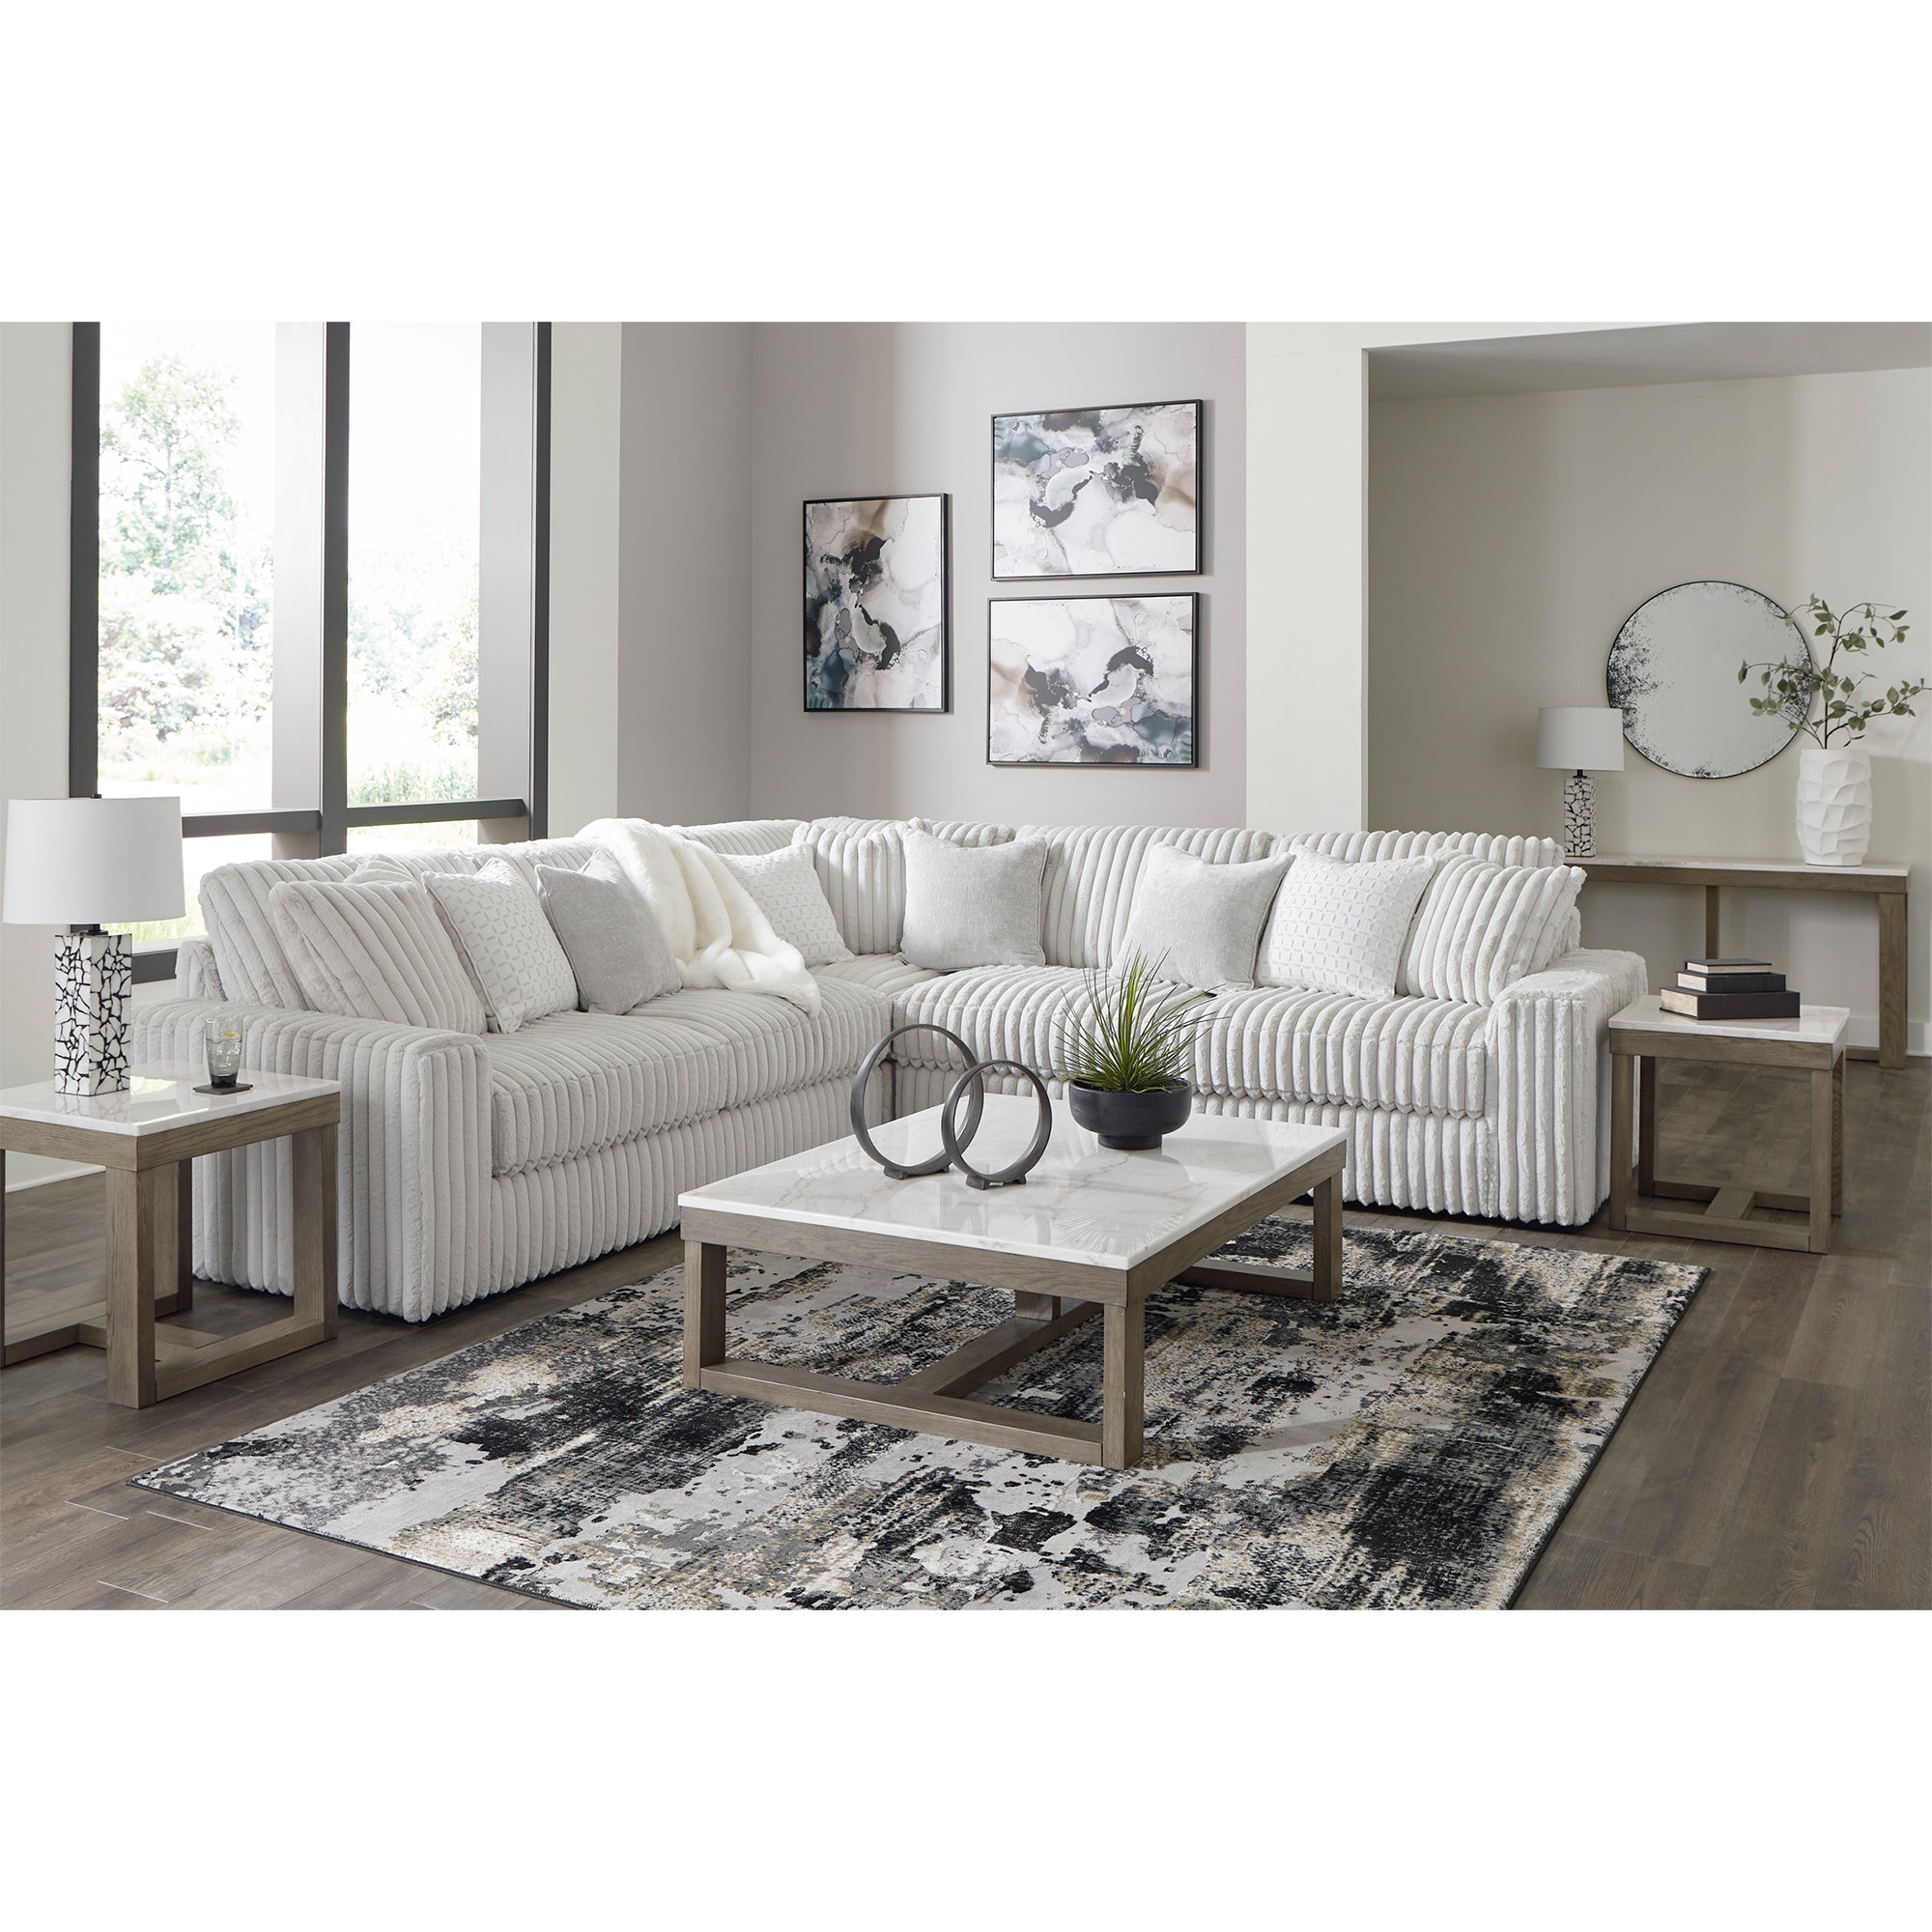 Stylish and practical Stupendous Sectional, designed for both comfort and durability with its unique feather-fiber cushion blend